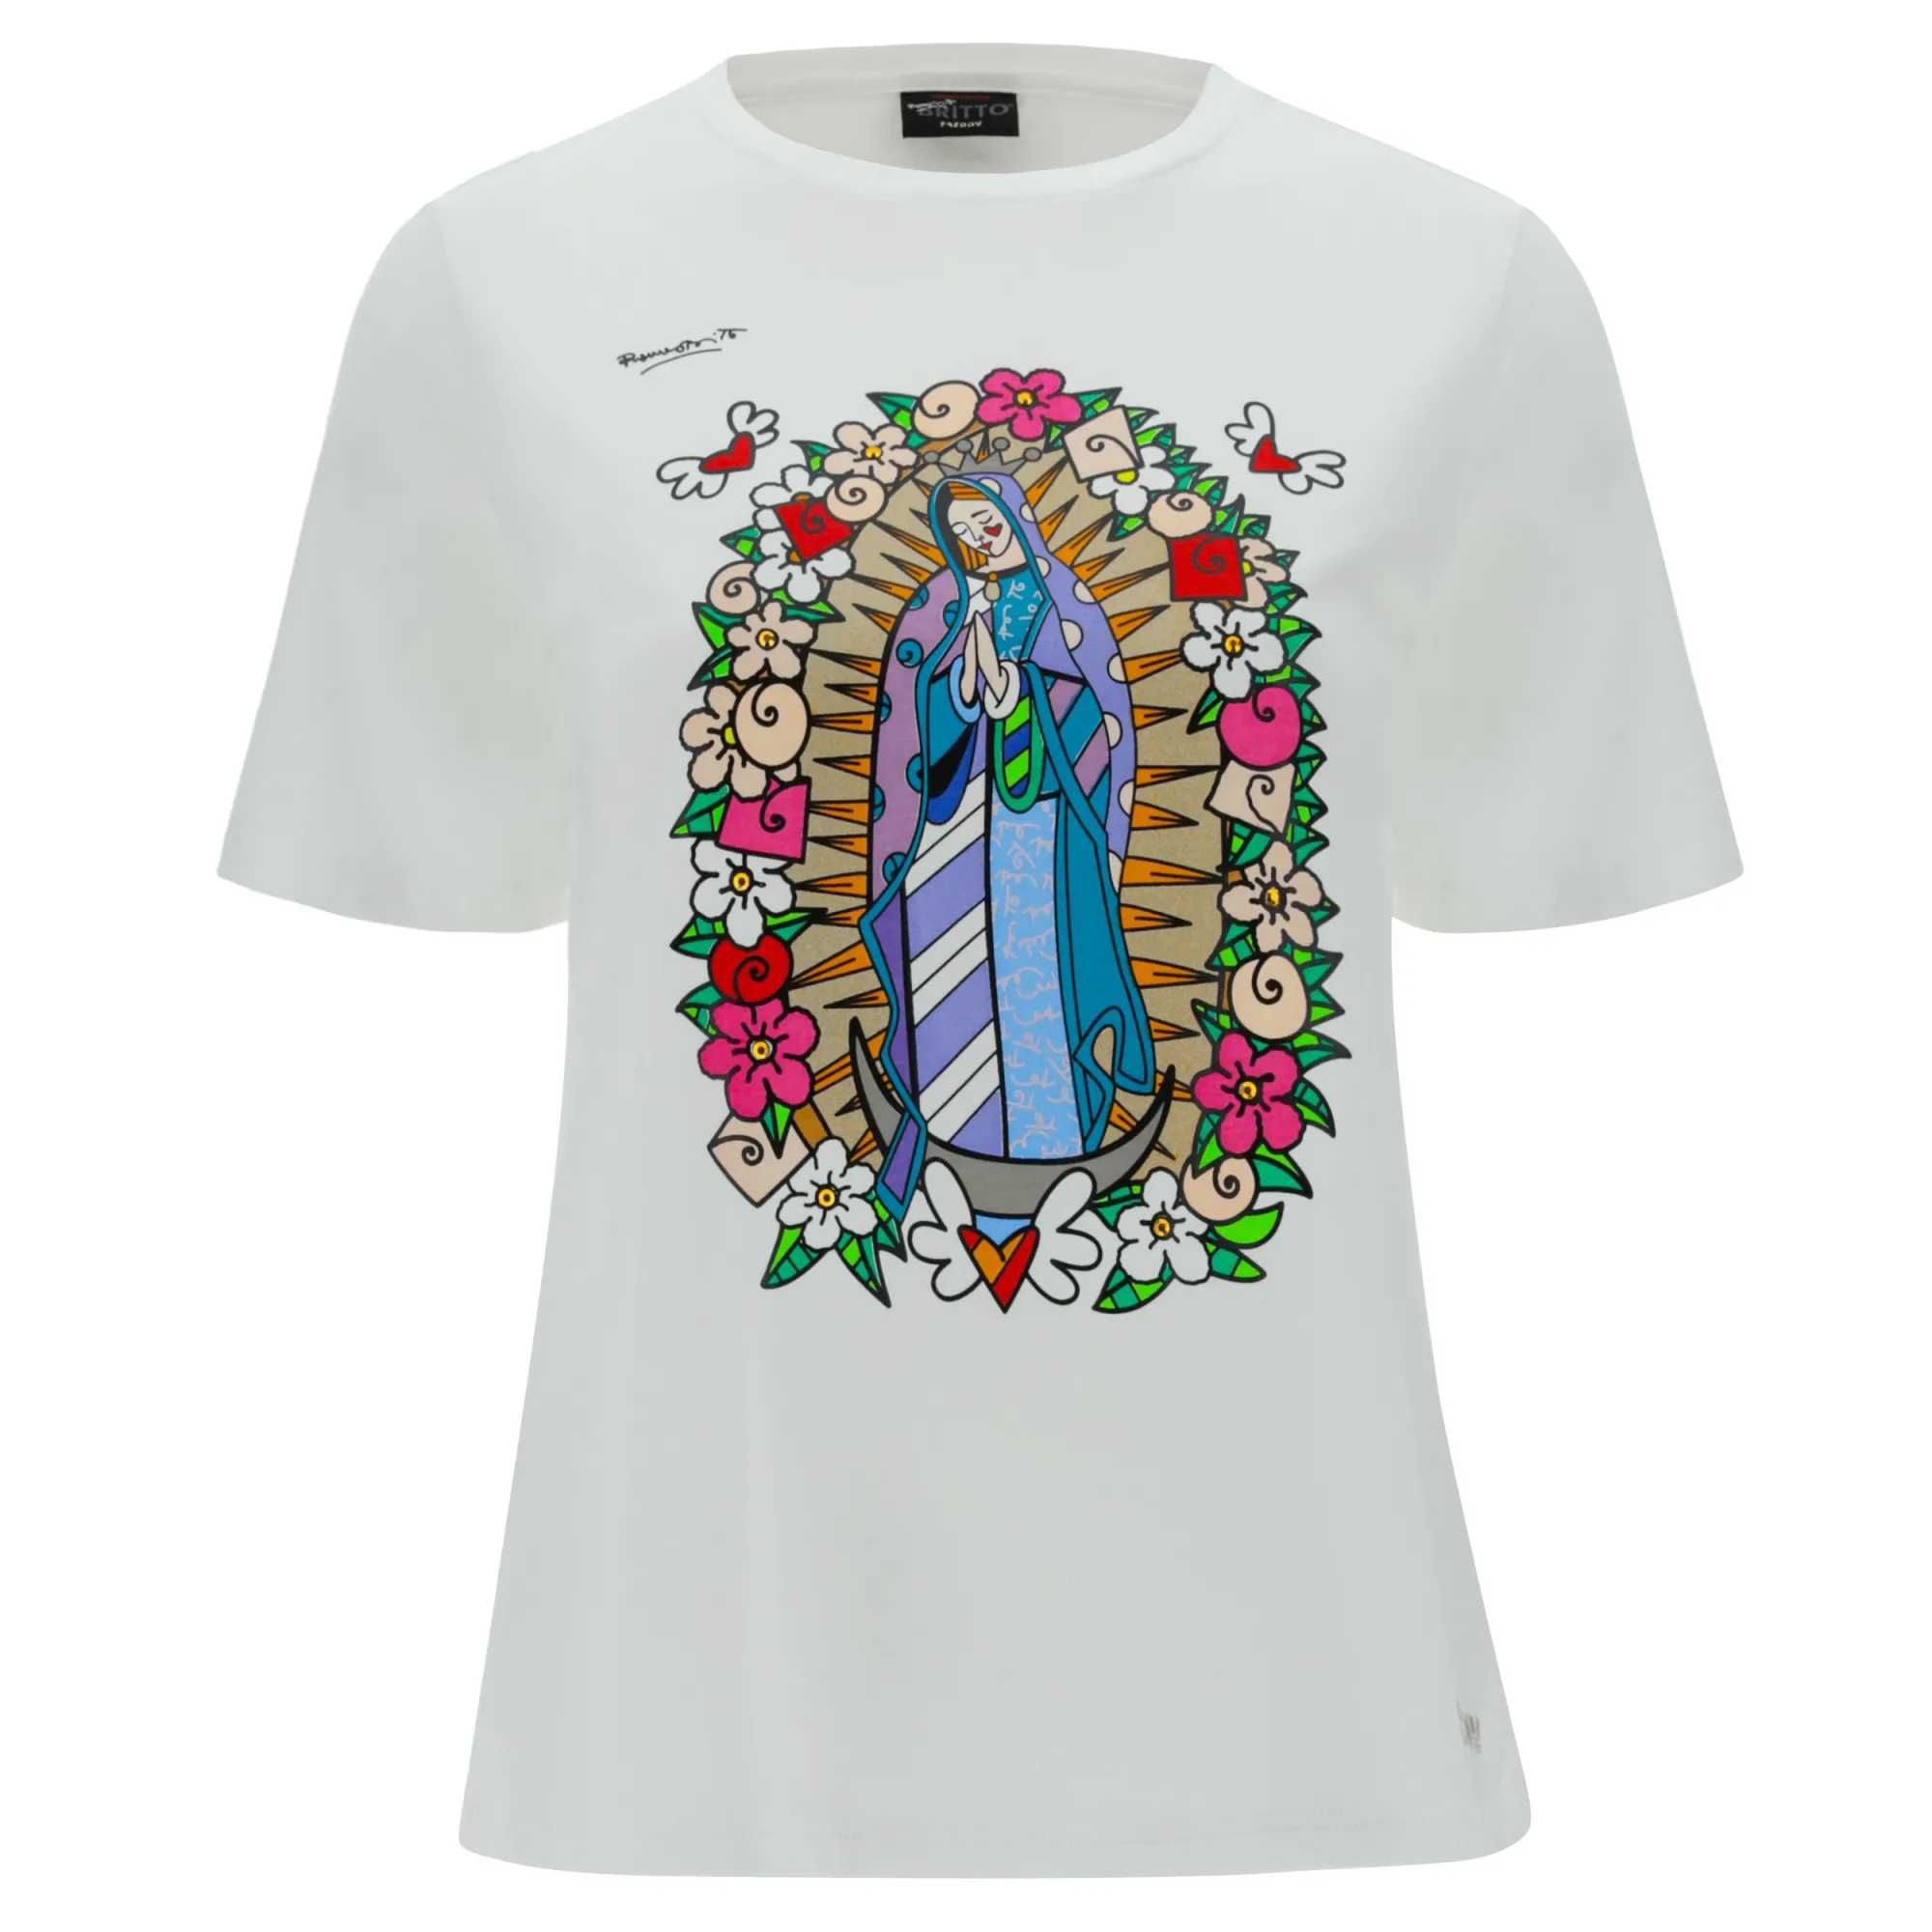 Our Lady Of Guadalupe T-Shirt - Romero Britto Collection